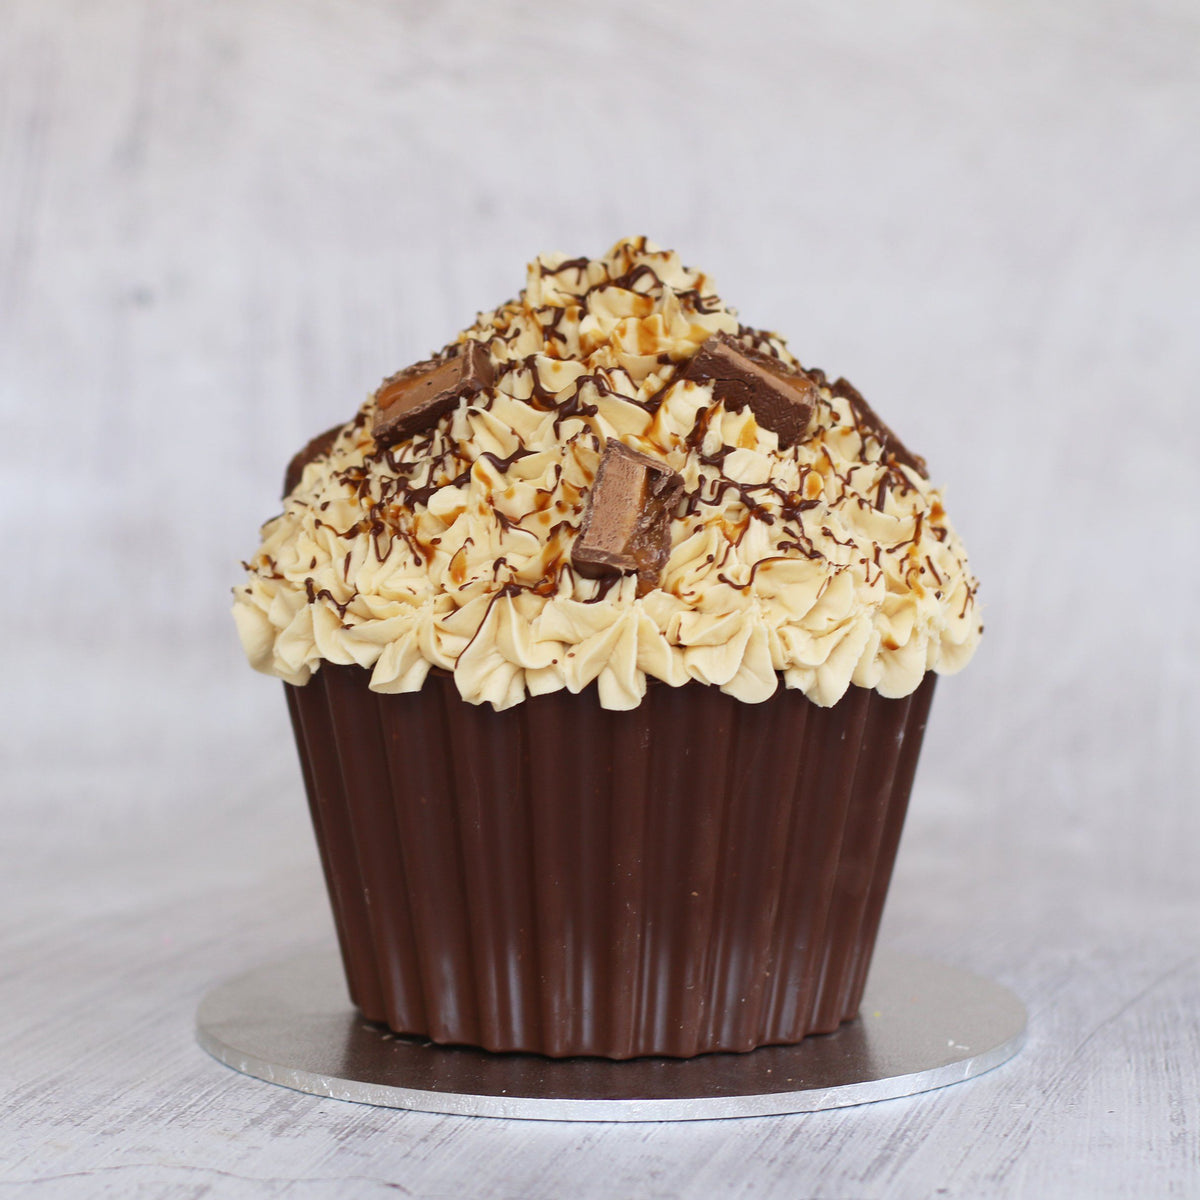 Choc Caramel Giant Cupcake Special Occasion The Cupcake Queens 